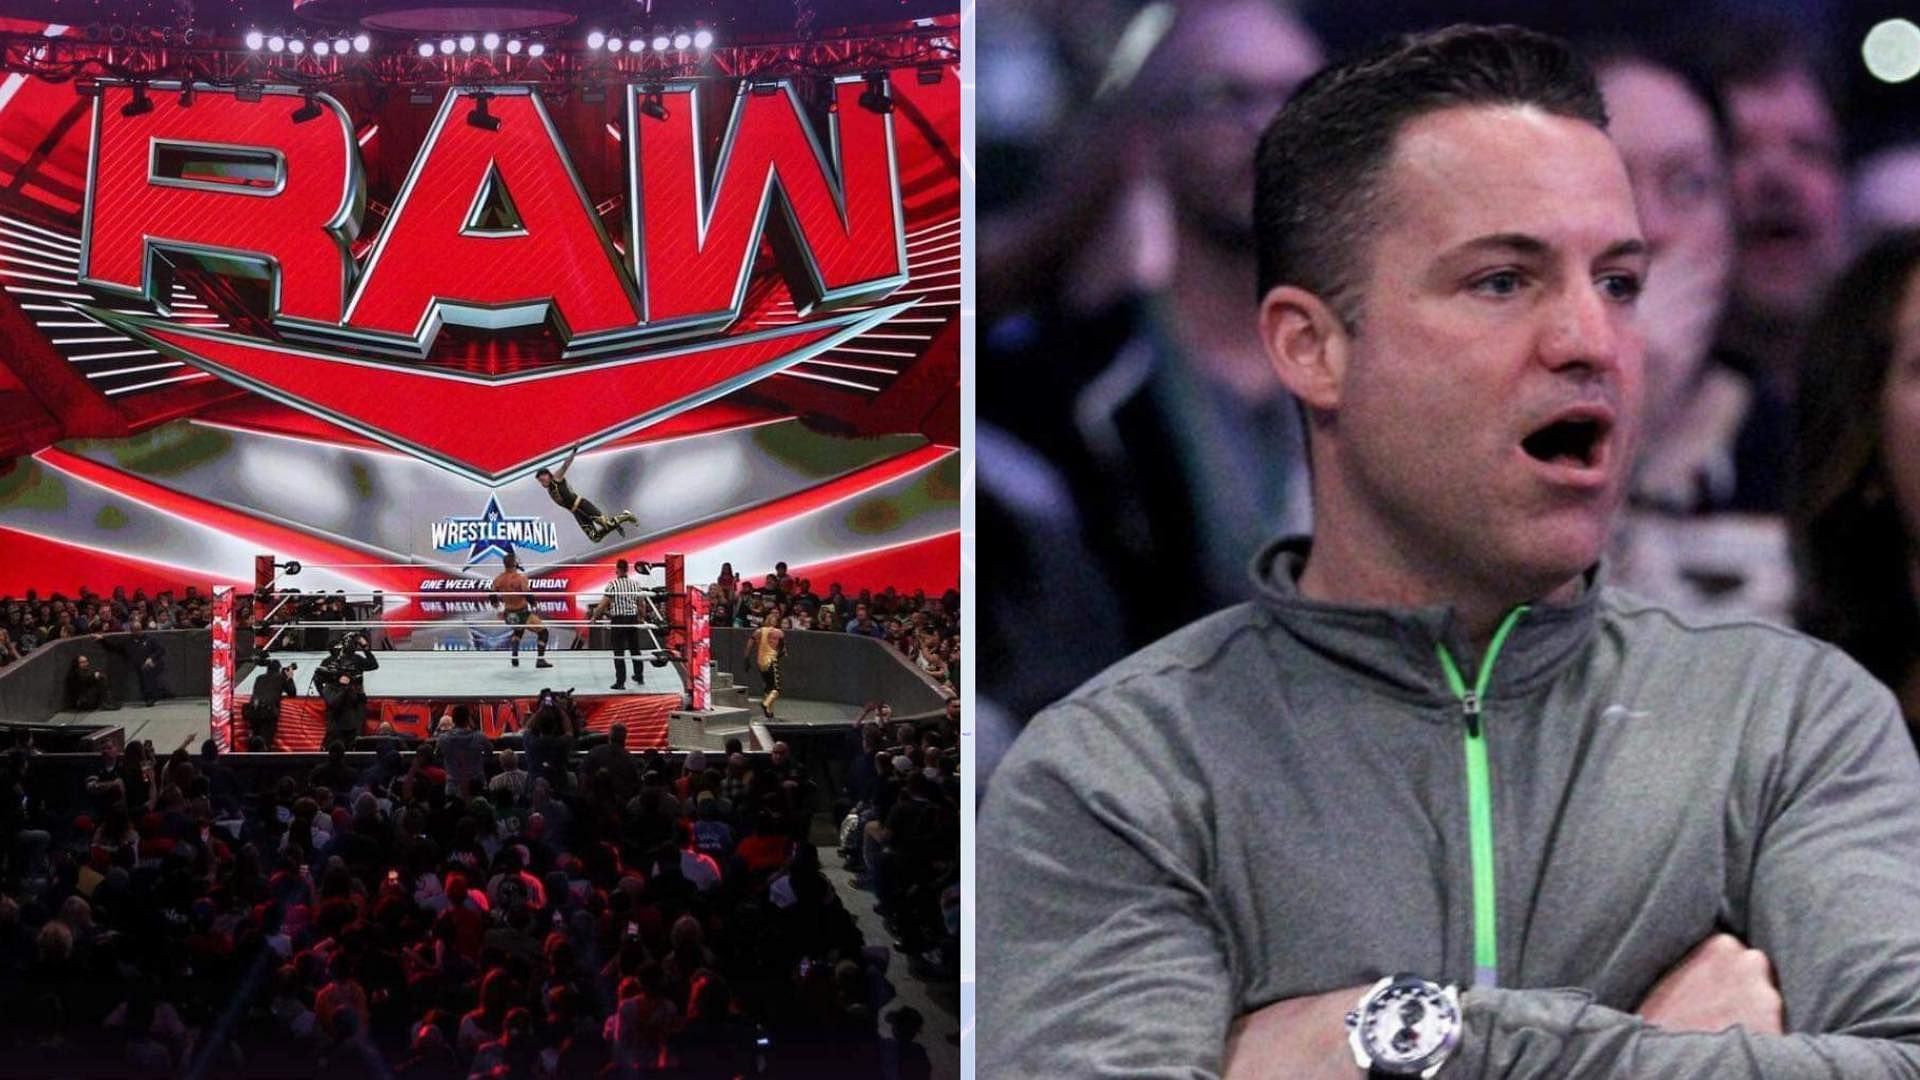 WWE RAW this week was live from the Bell Centre in Montreal, Quebec, Canada